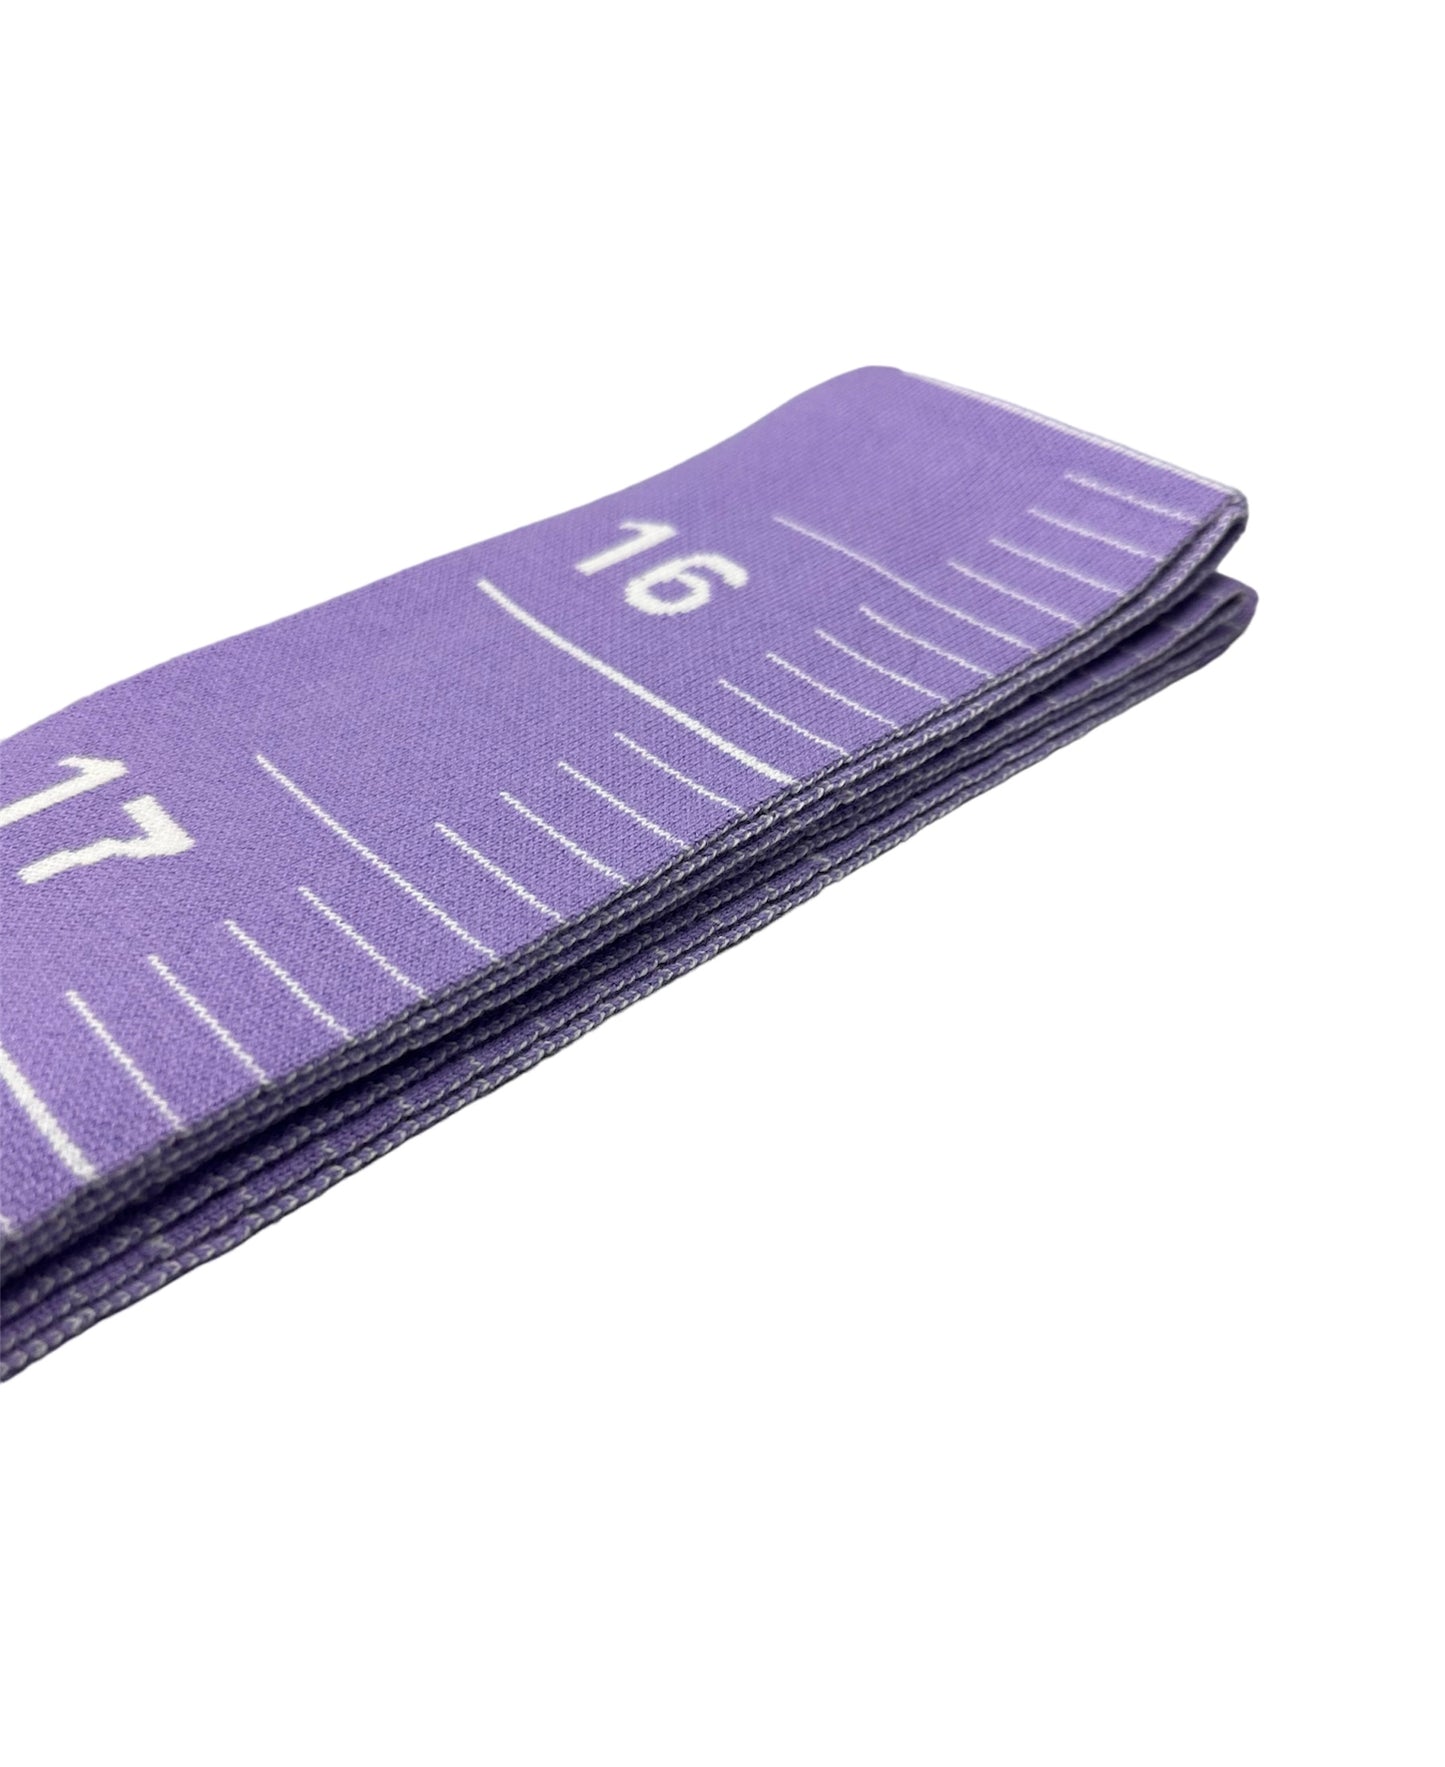 At the Venue | Curie Measuring Tape Scarf